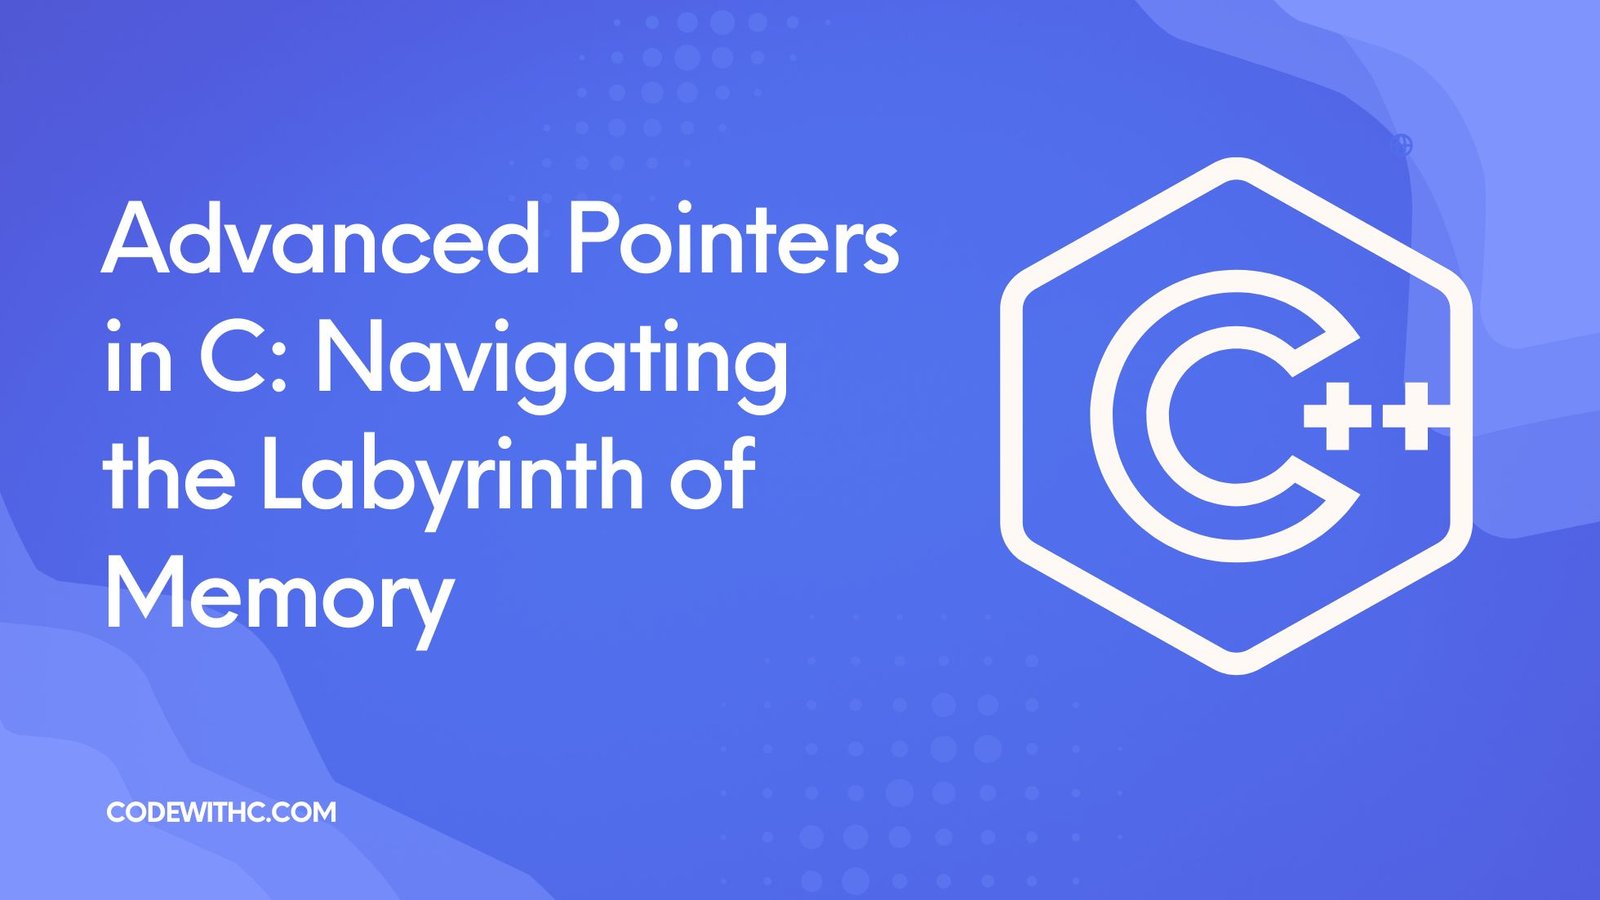 Advanced Pointers in C: Navigating the Labyrinth of Memory